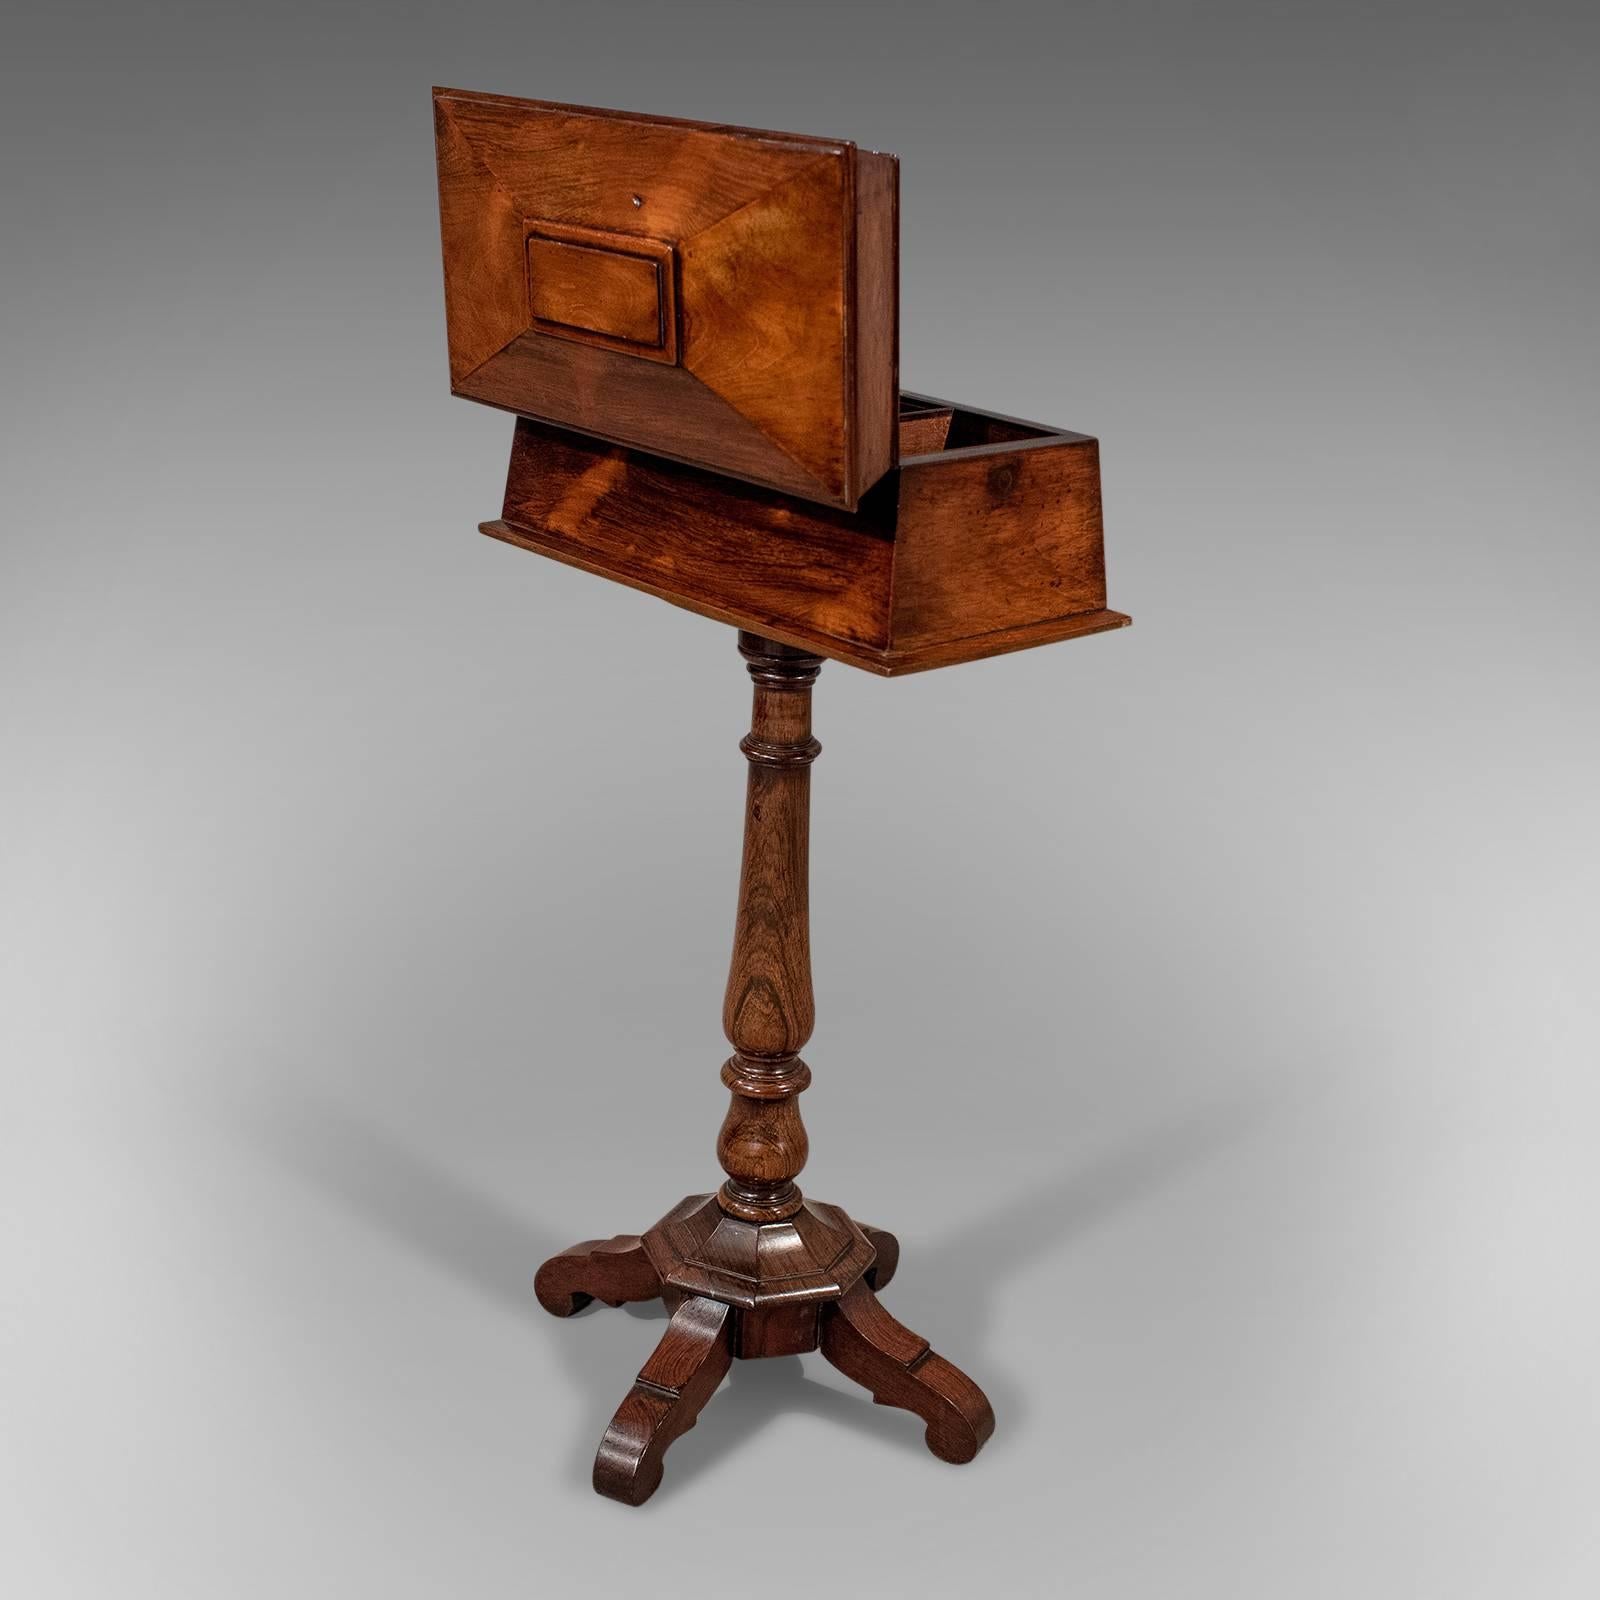 Great Britain (UK) Antique English Regency Tea Poy Caddy on Stand Fine Rosewood, circa 1820